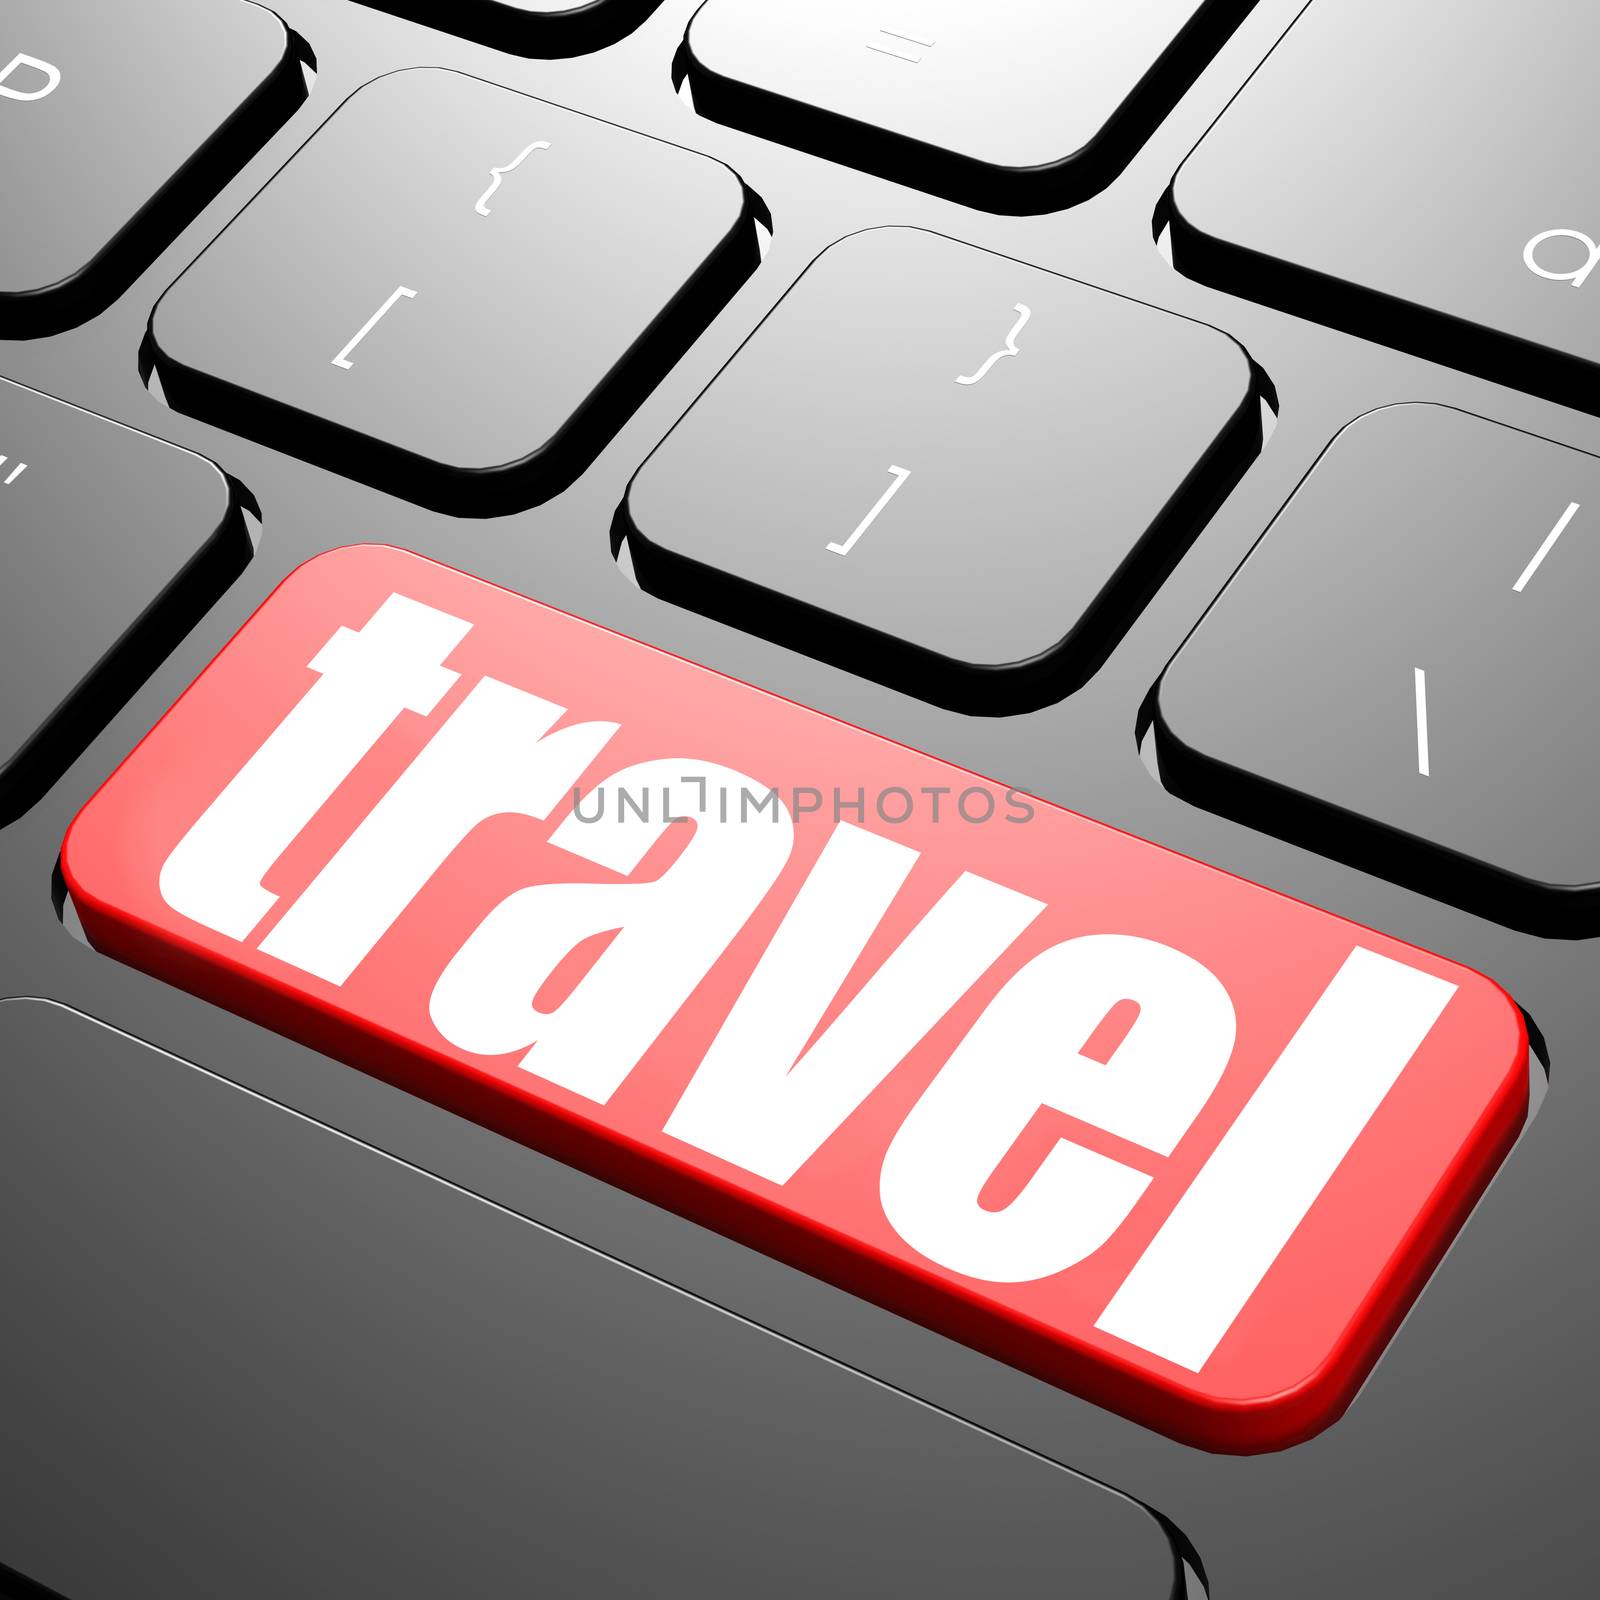 Keyboard with travel text by tang90246